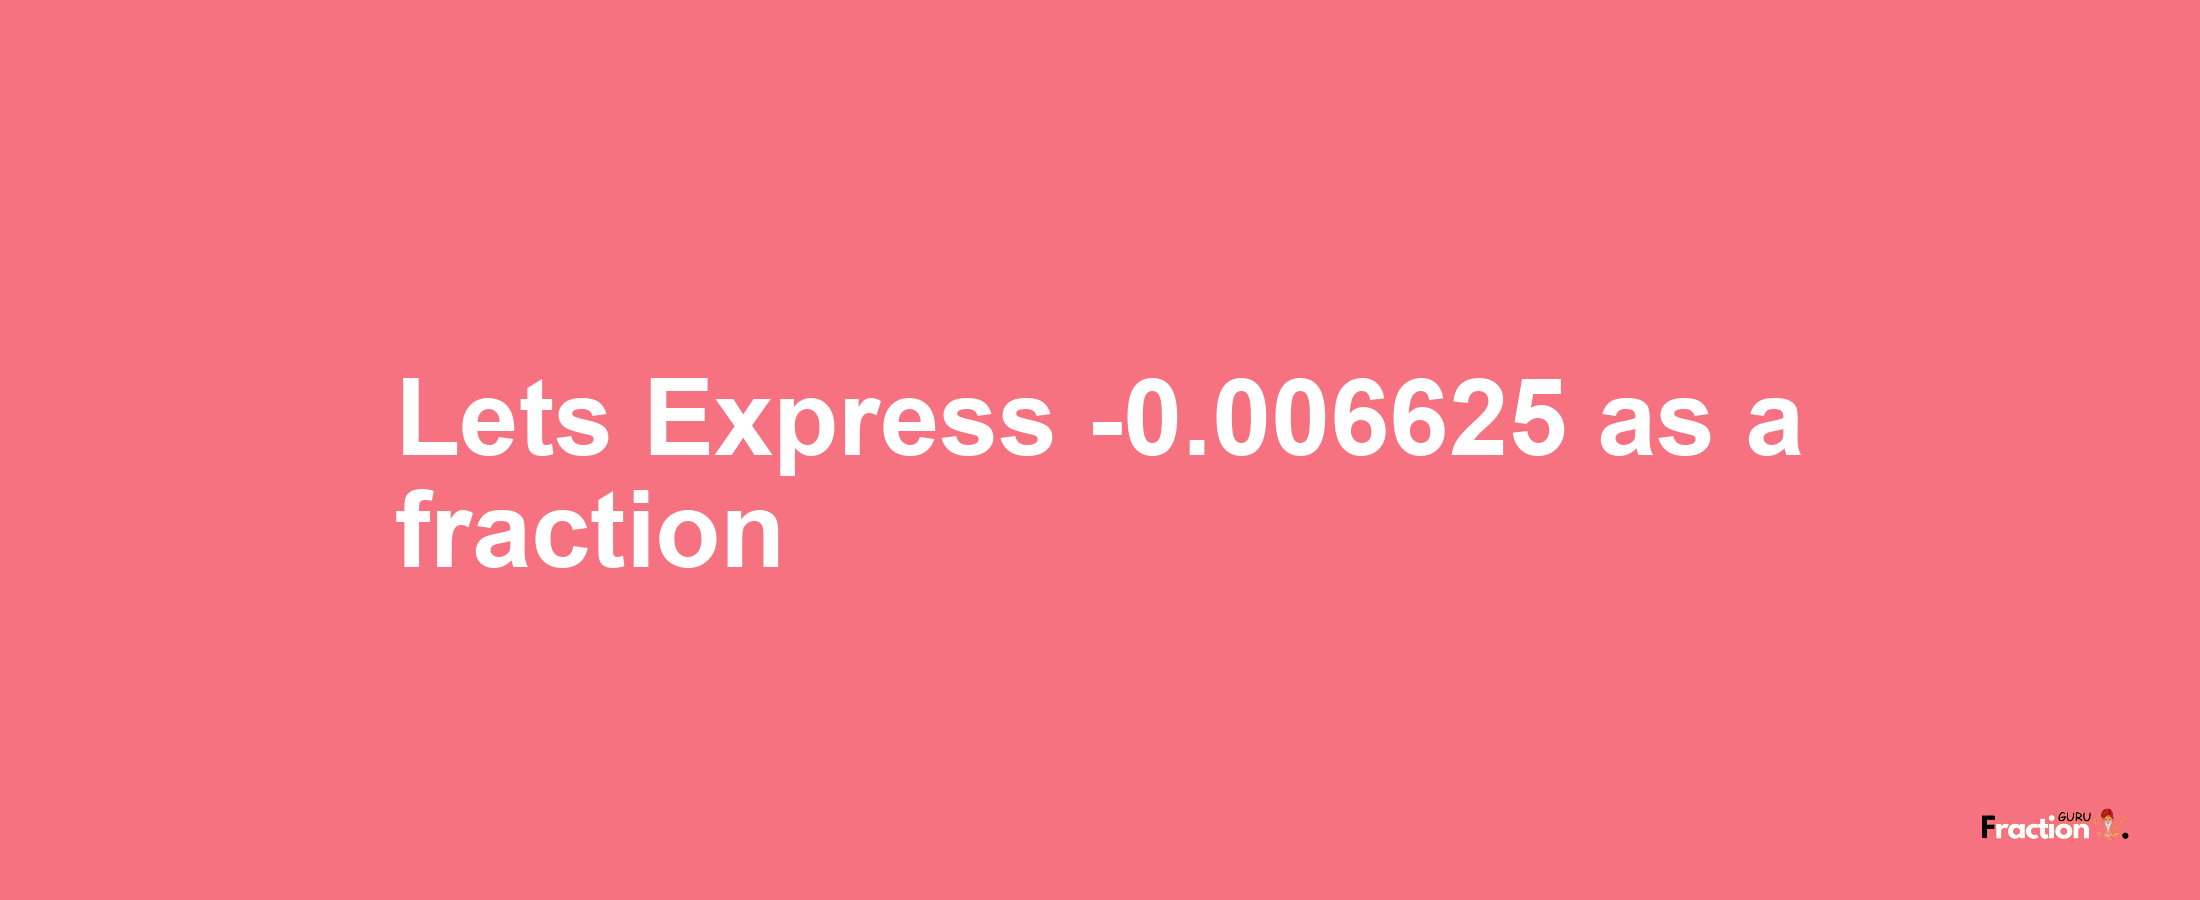 Lets Express -0.006625 as afraction